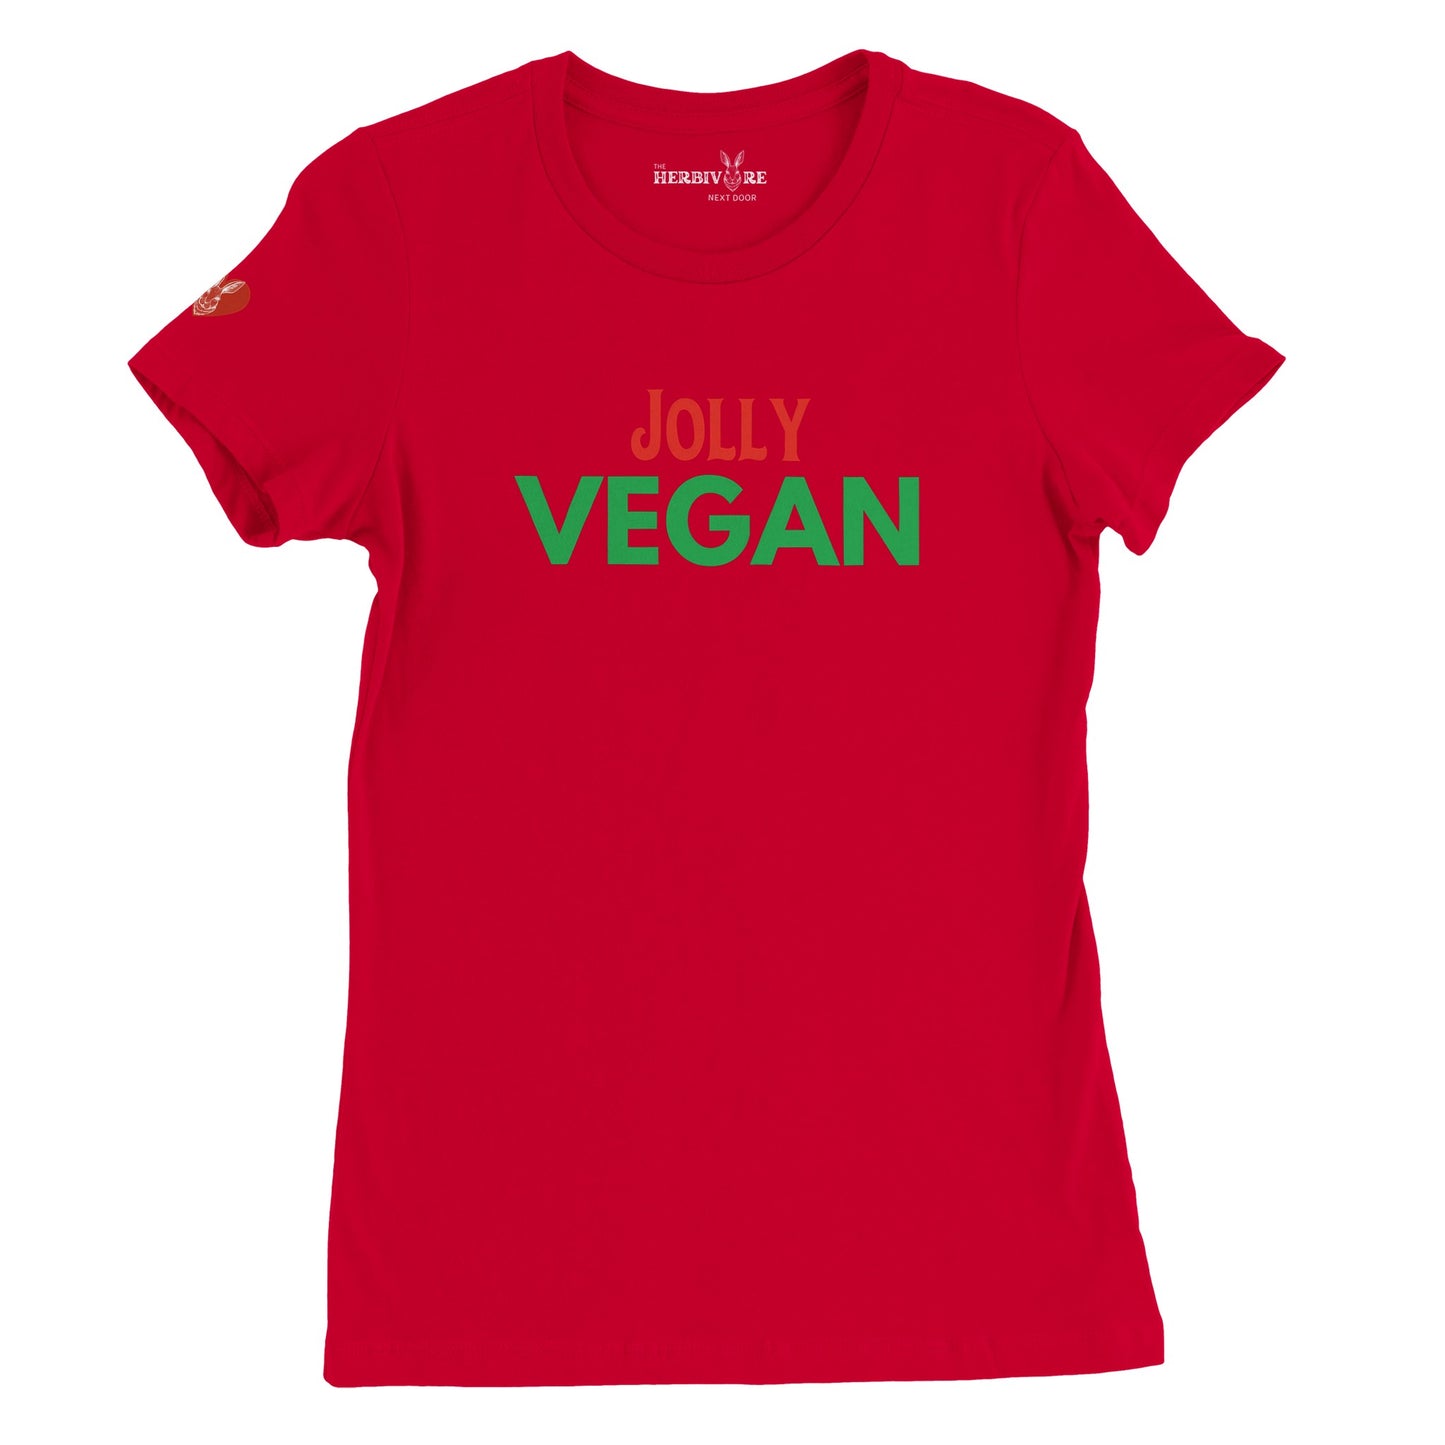 Jolly Vegan - Women's Style (Women's run small - get one size up from normal unisex)